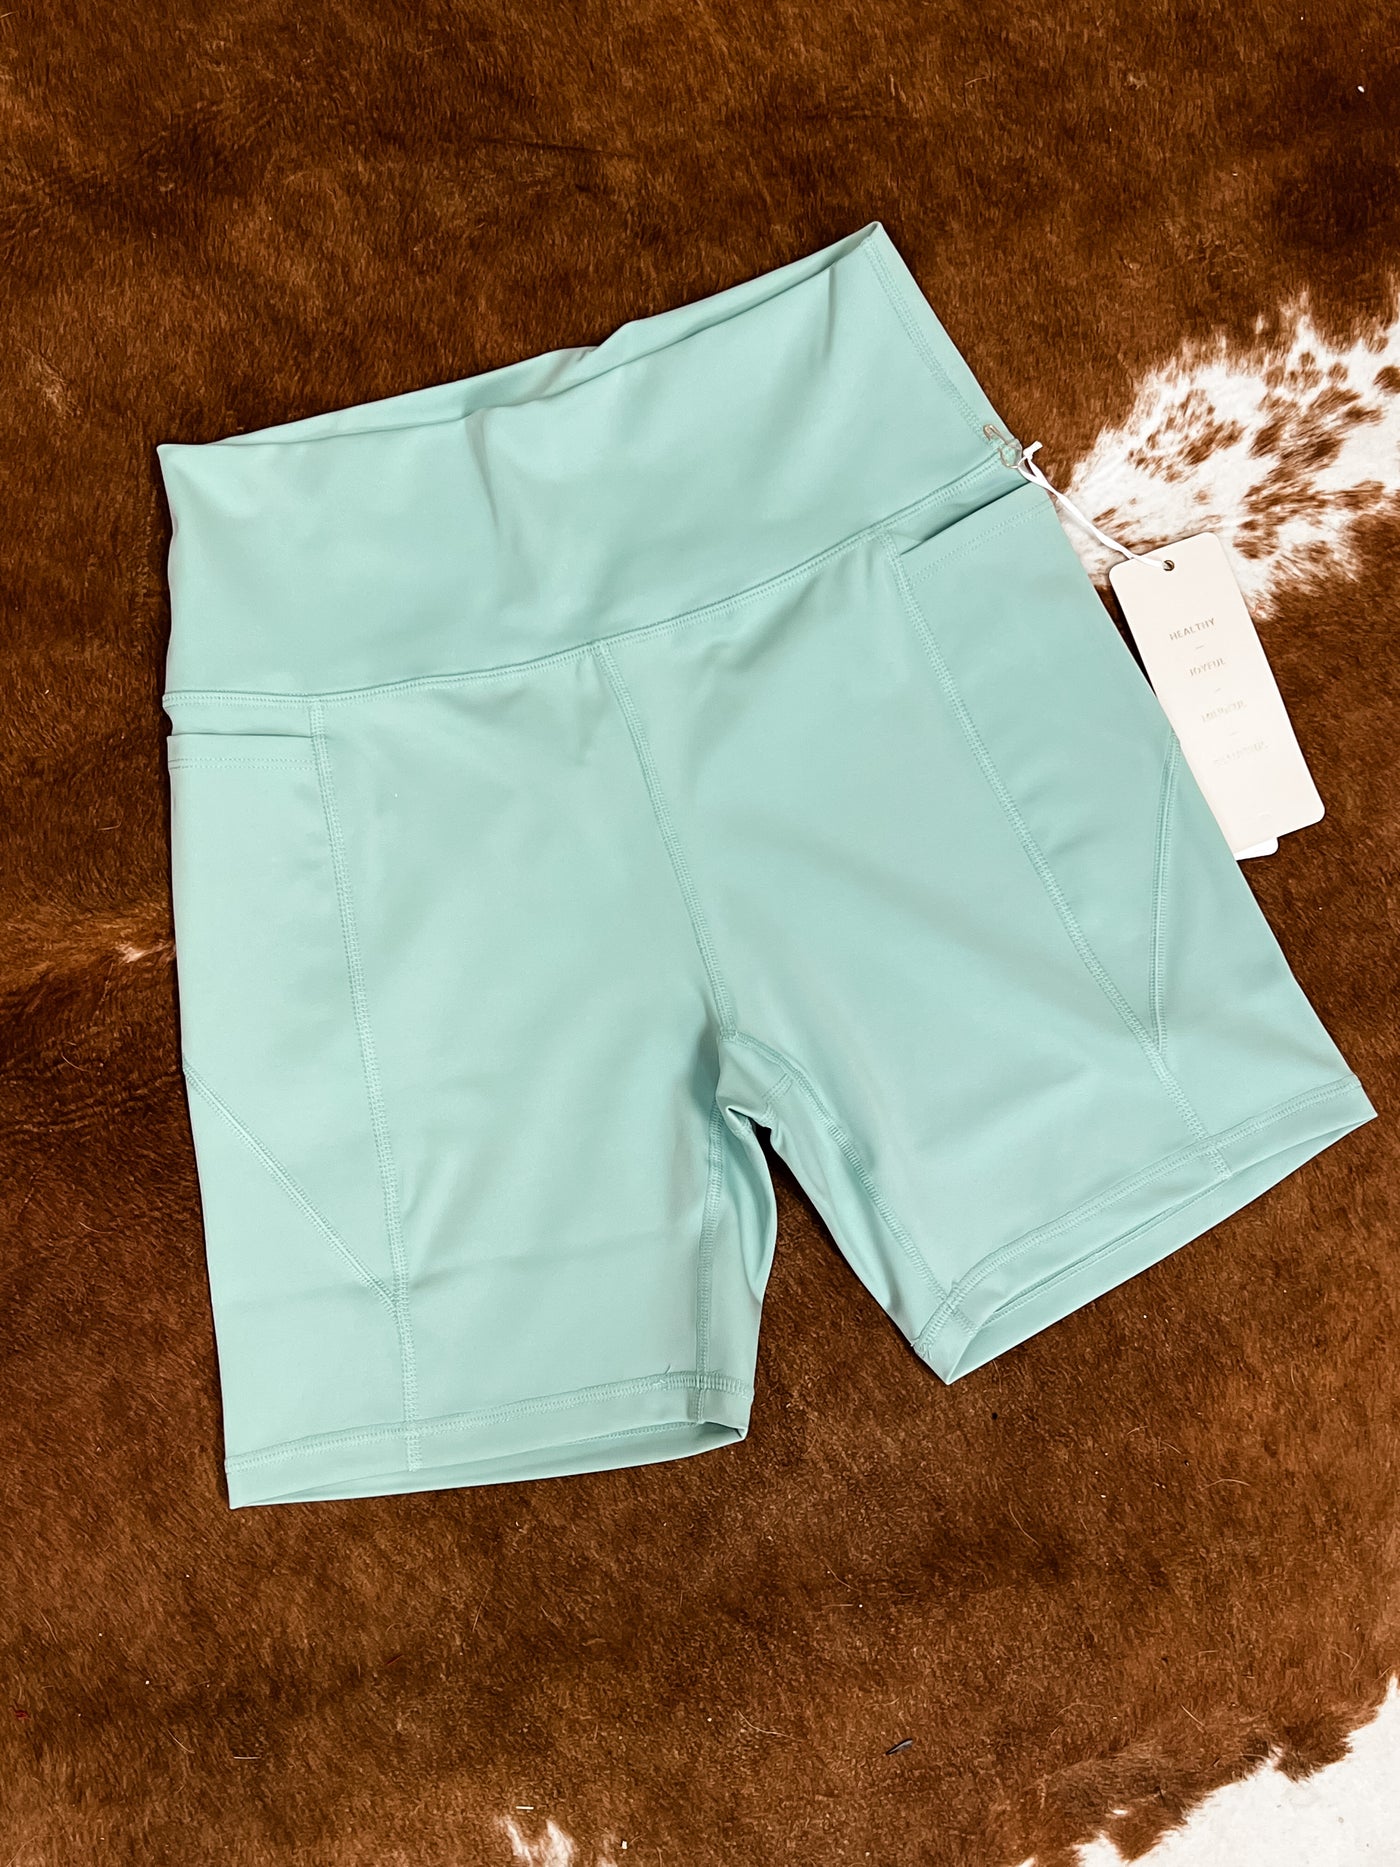 Every Day Activewear Pocket Biker Shorts - CHALKY MINT